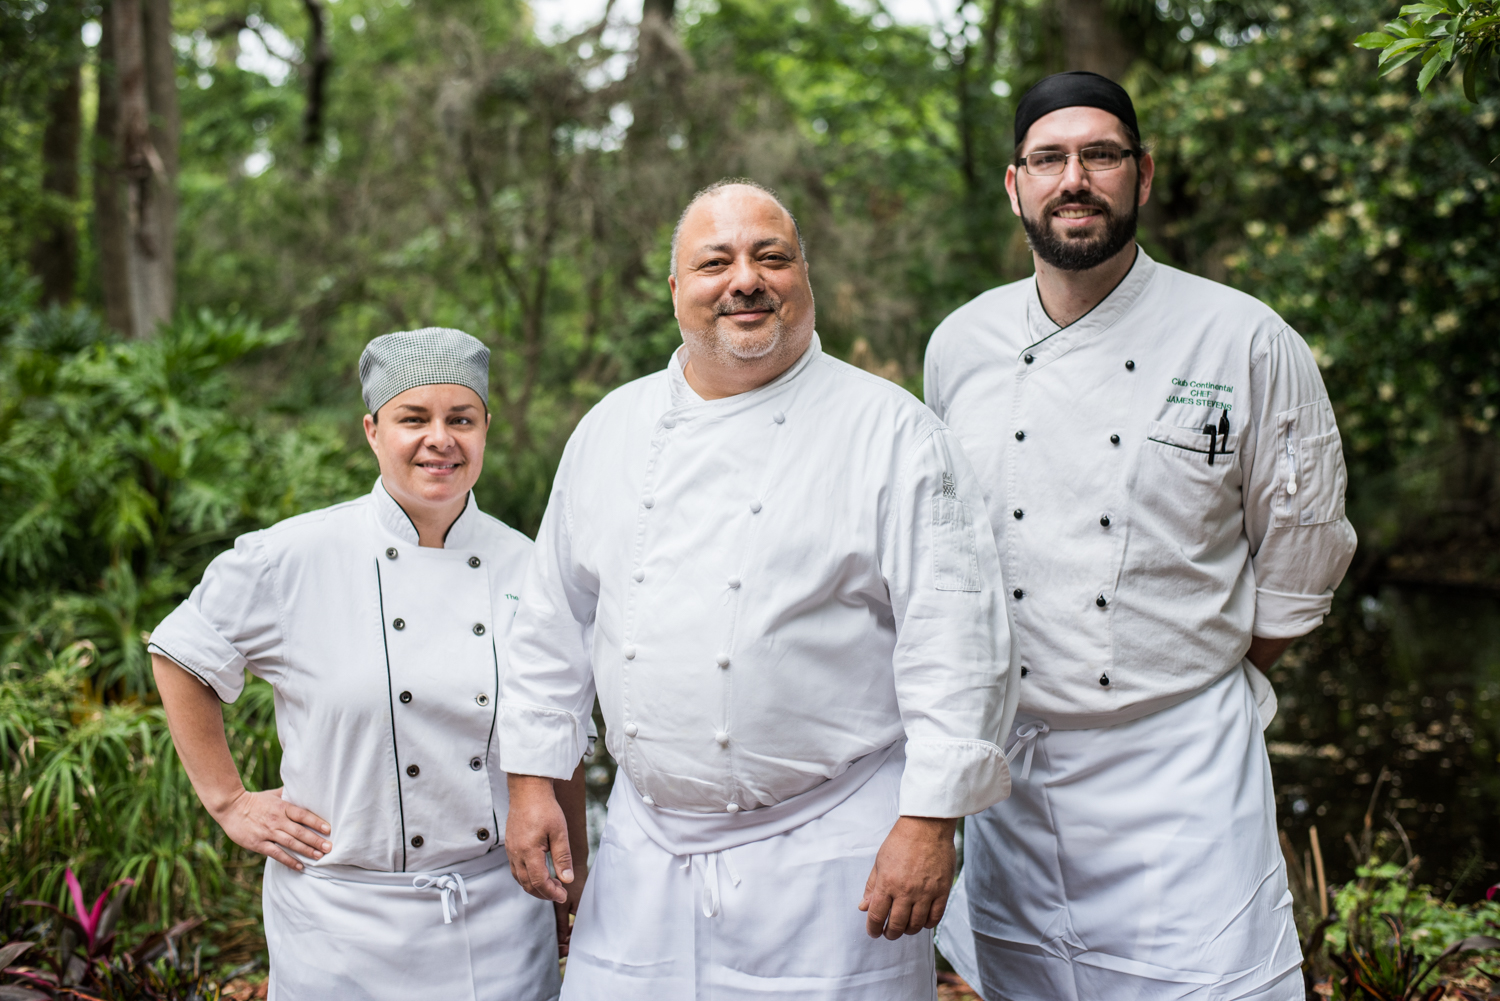 Chefs from the Club Continental in Jacksonville